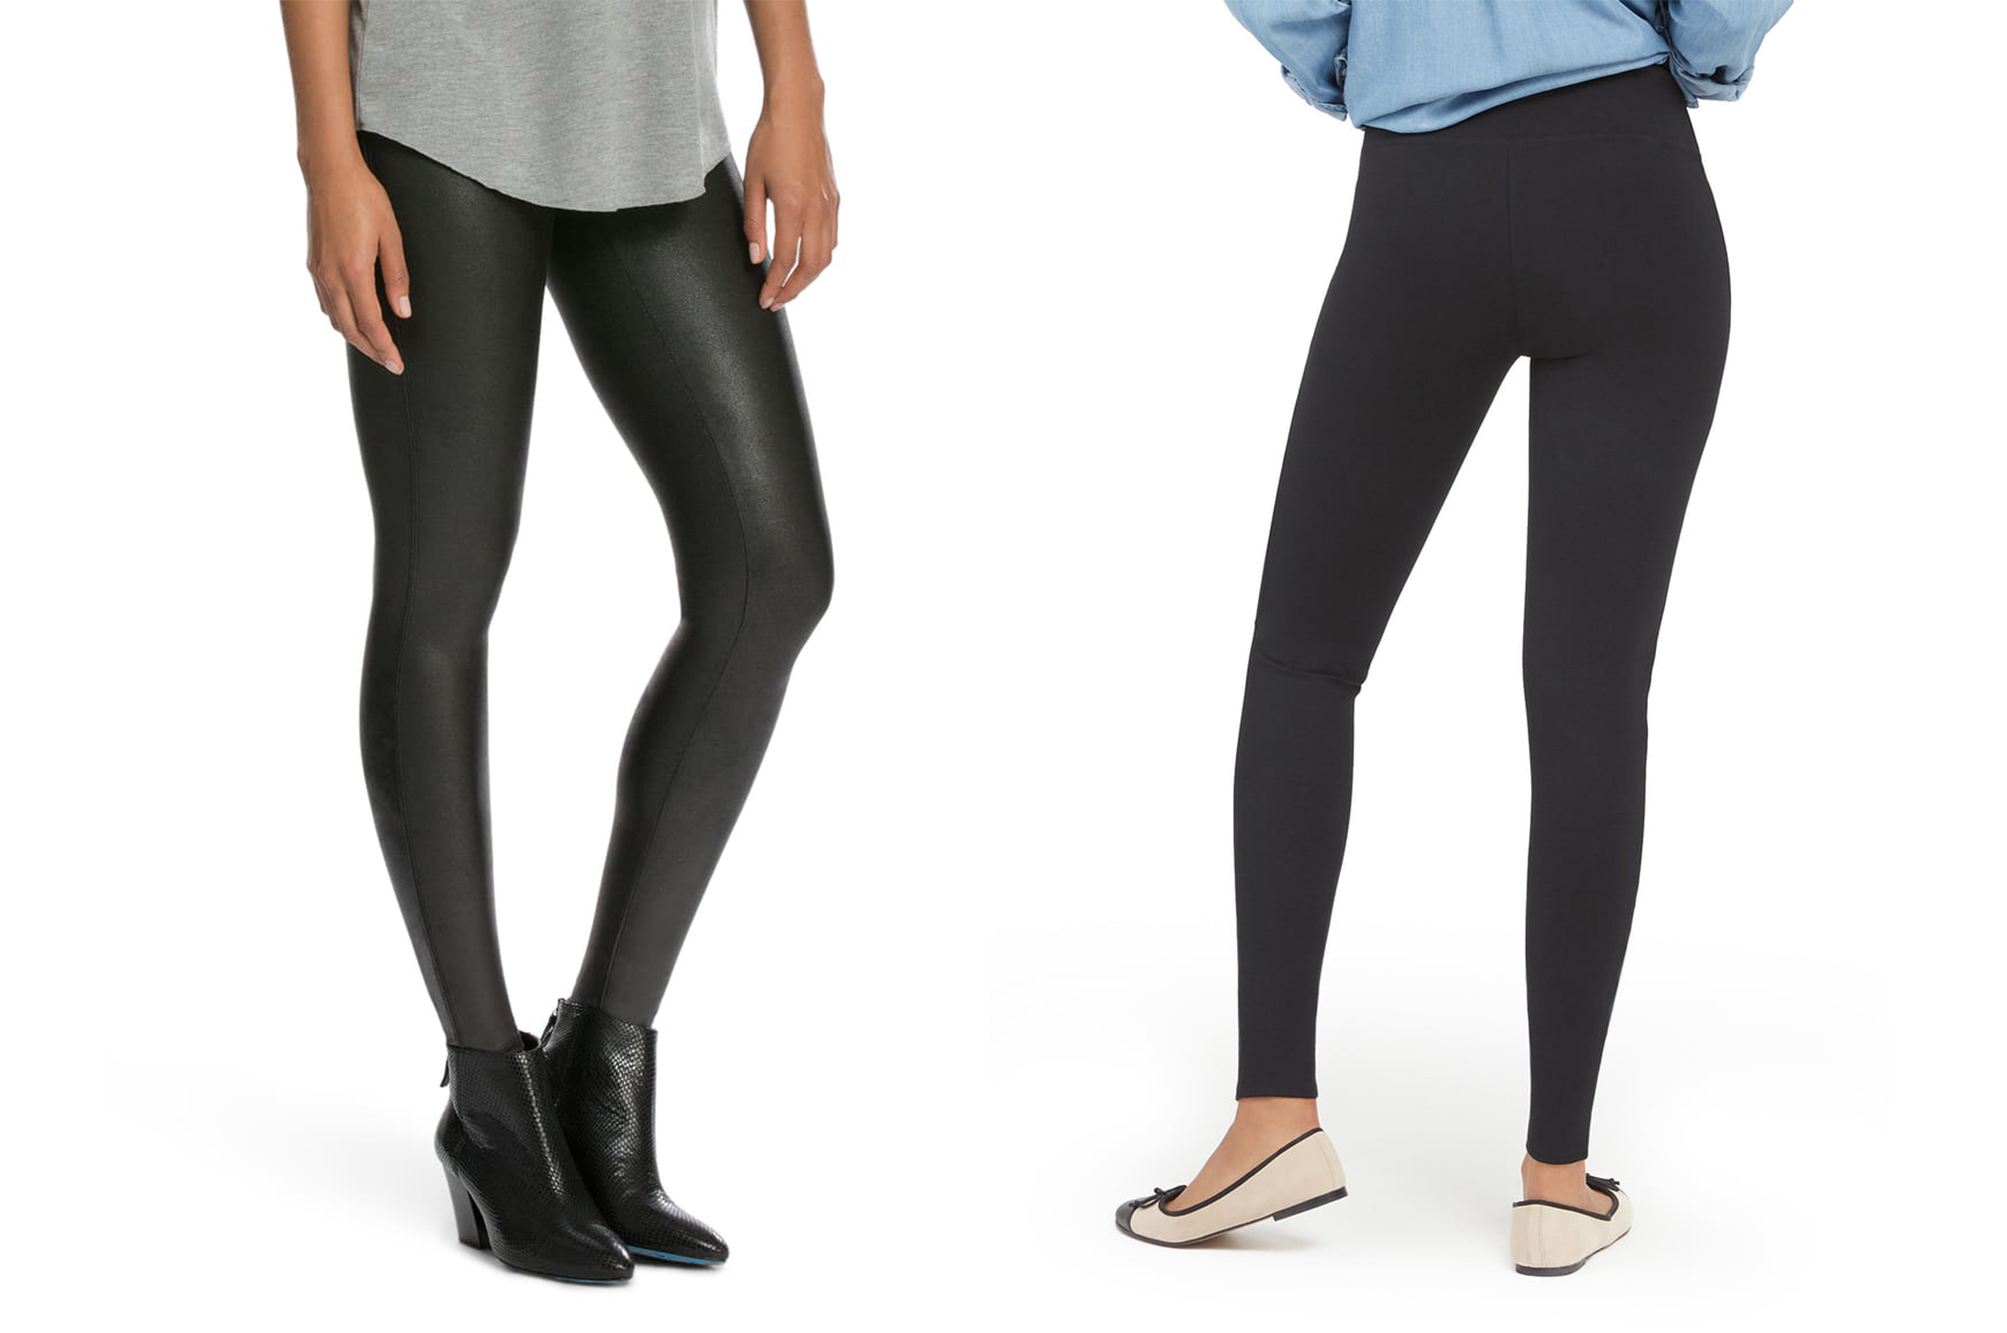 Nordstrom Anniversary Sale: All of Our Favorite Spanx Items